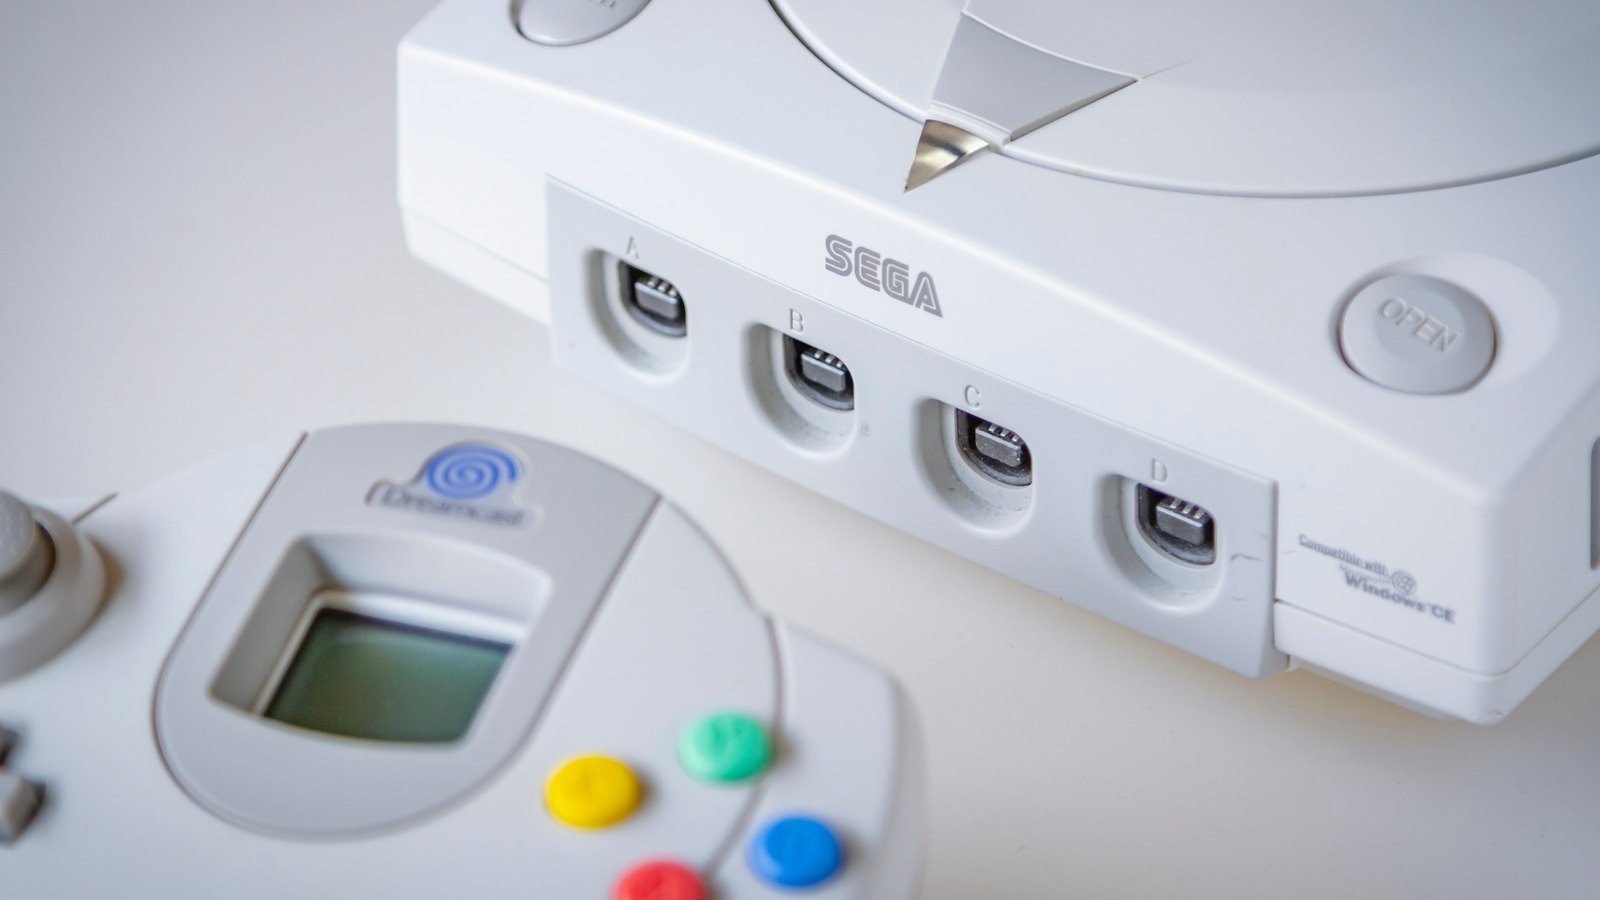 AFTER OVER TWO DECADES, THE SEGA DREAMCAST IS GETTING A NEW UPGRADE